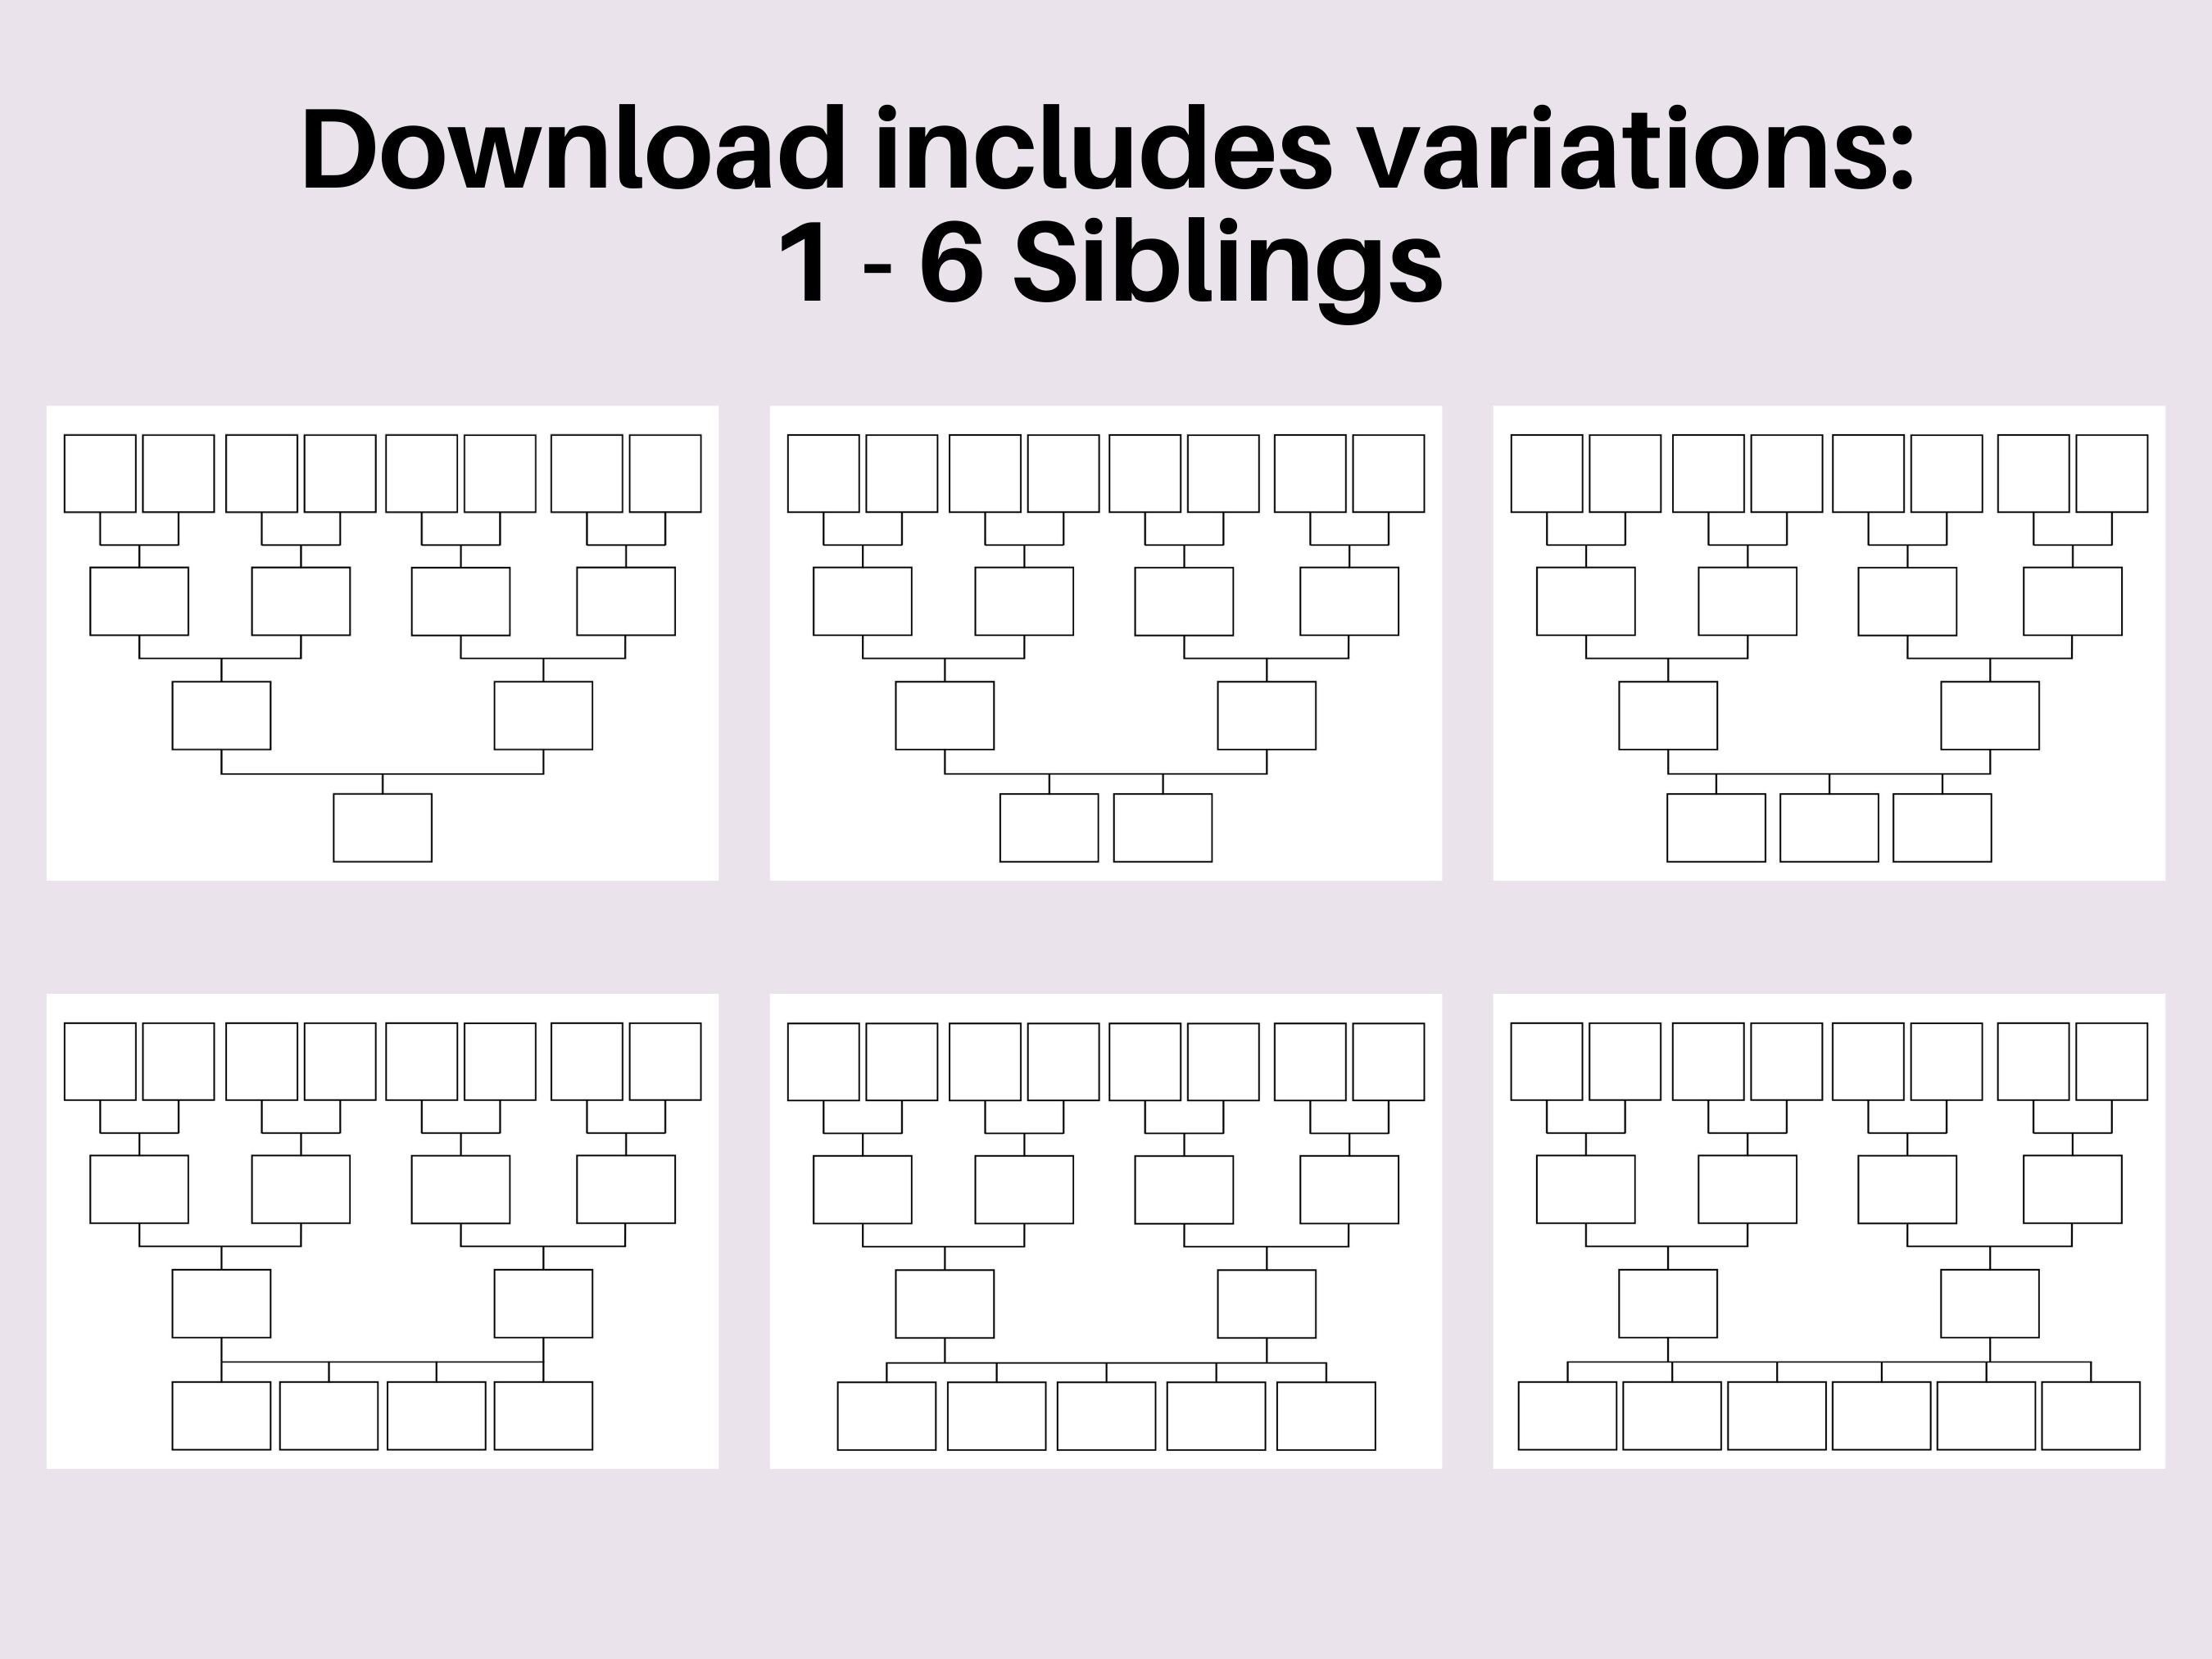 53 Printable Pedigree Chart Forms and Templates - Fillable Samples in PDF,  Word to Download